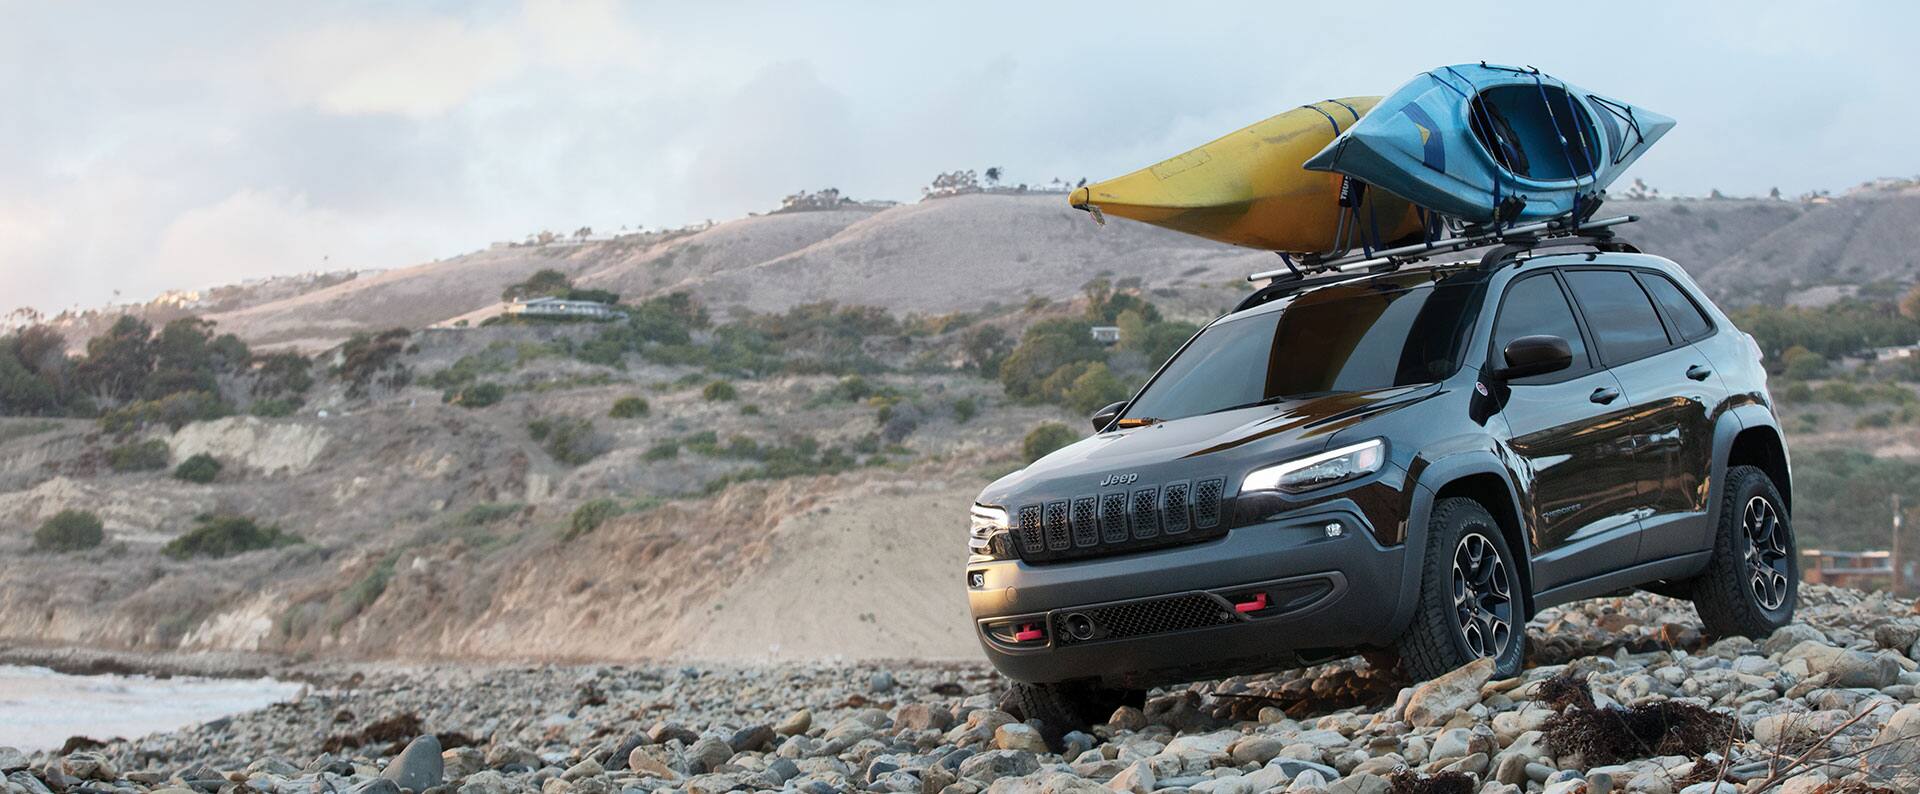 The 2022 Jeep Cherokee being driven on a rocky beach with two kayaks attached to its roof rack.